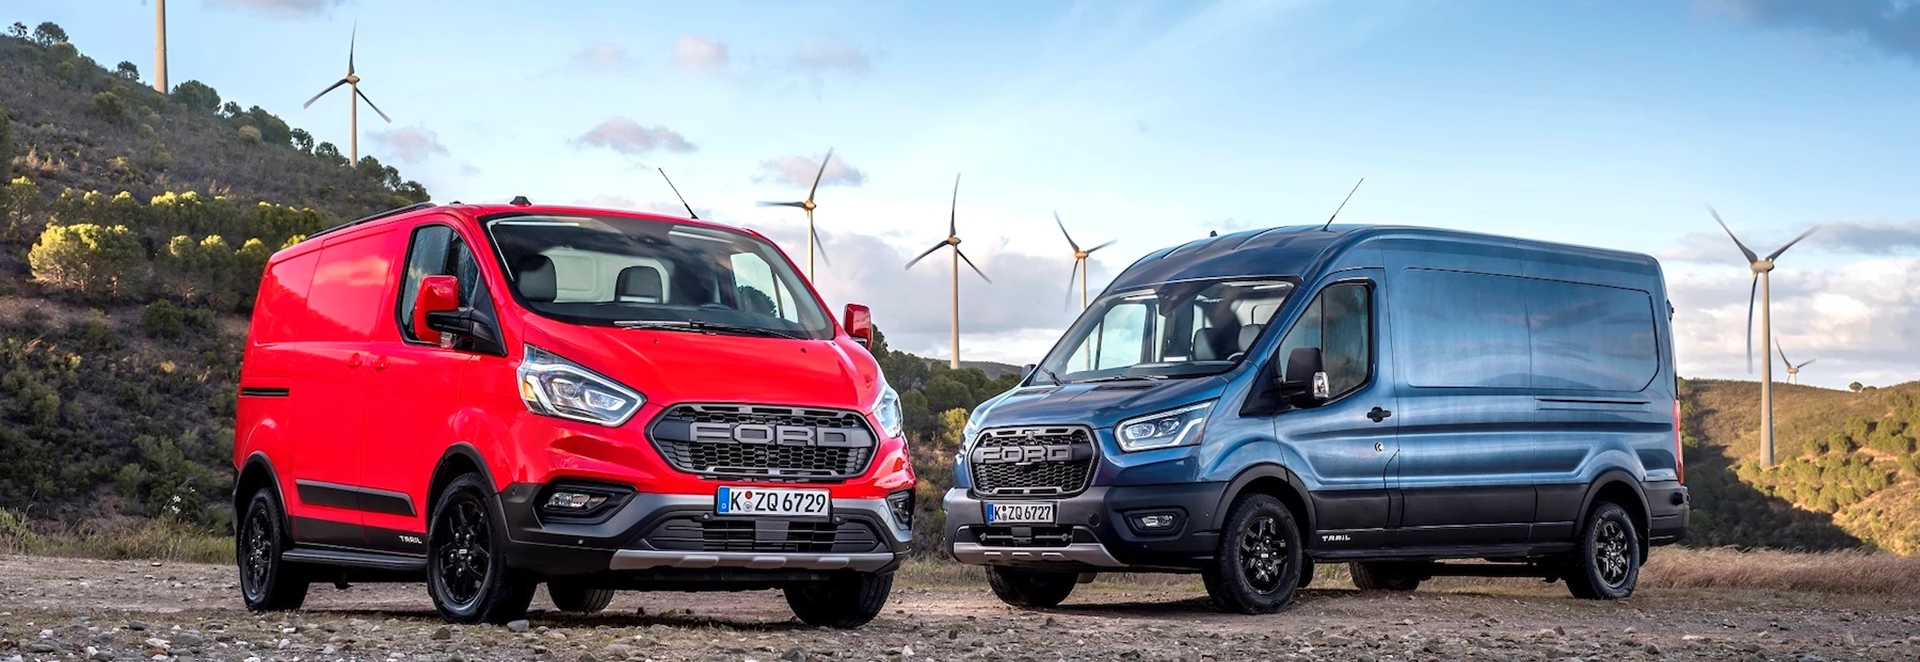 Ford adds rugged appeal to Transit with new Trail and Active models 